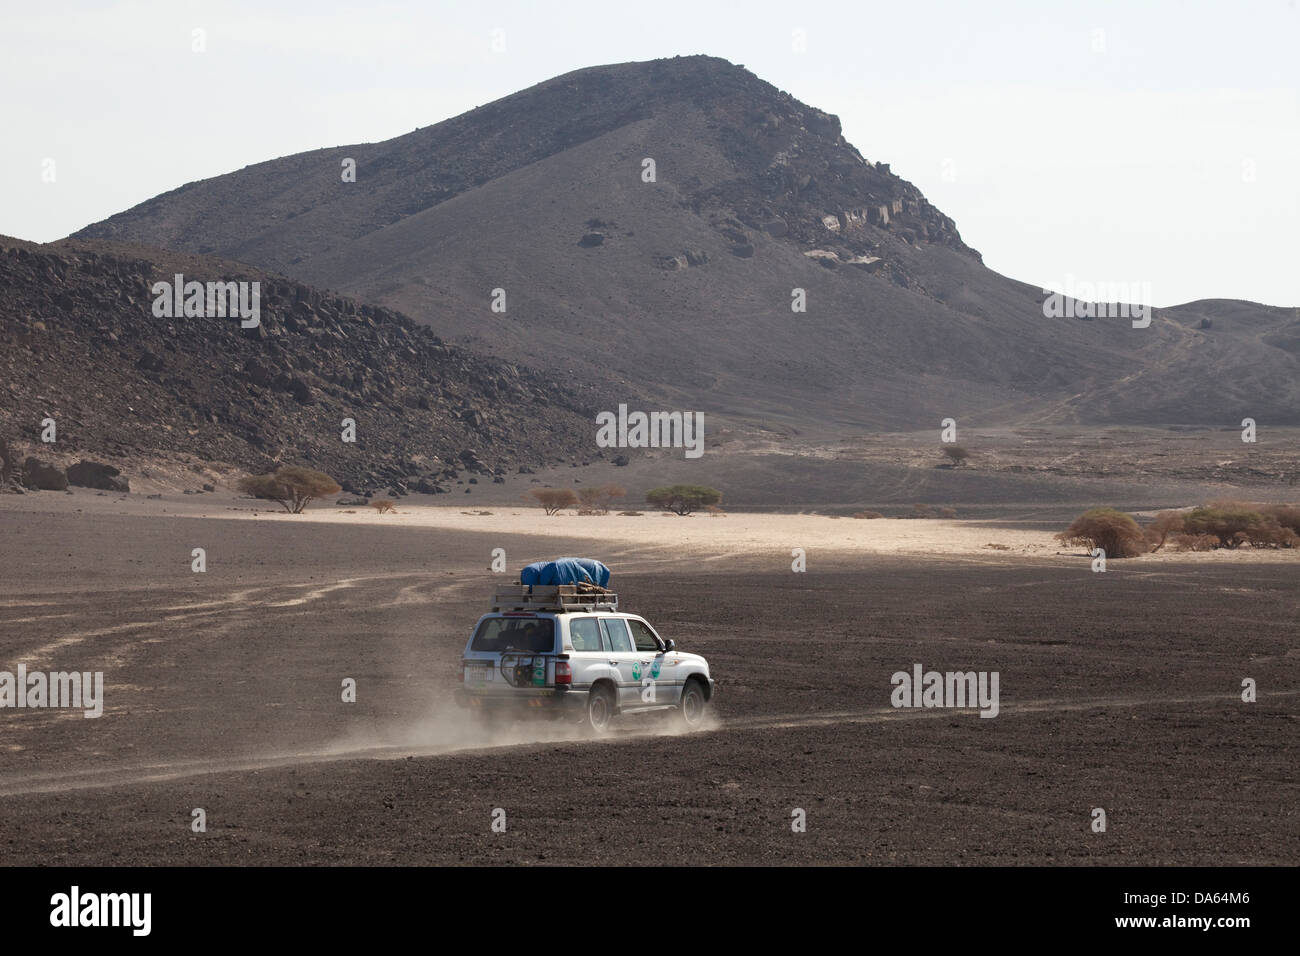 Expedition, vehicle, vessel, car, automobile, cross-country, vehicle, volcanic, area, Africa, Djibouti, Stock Photo